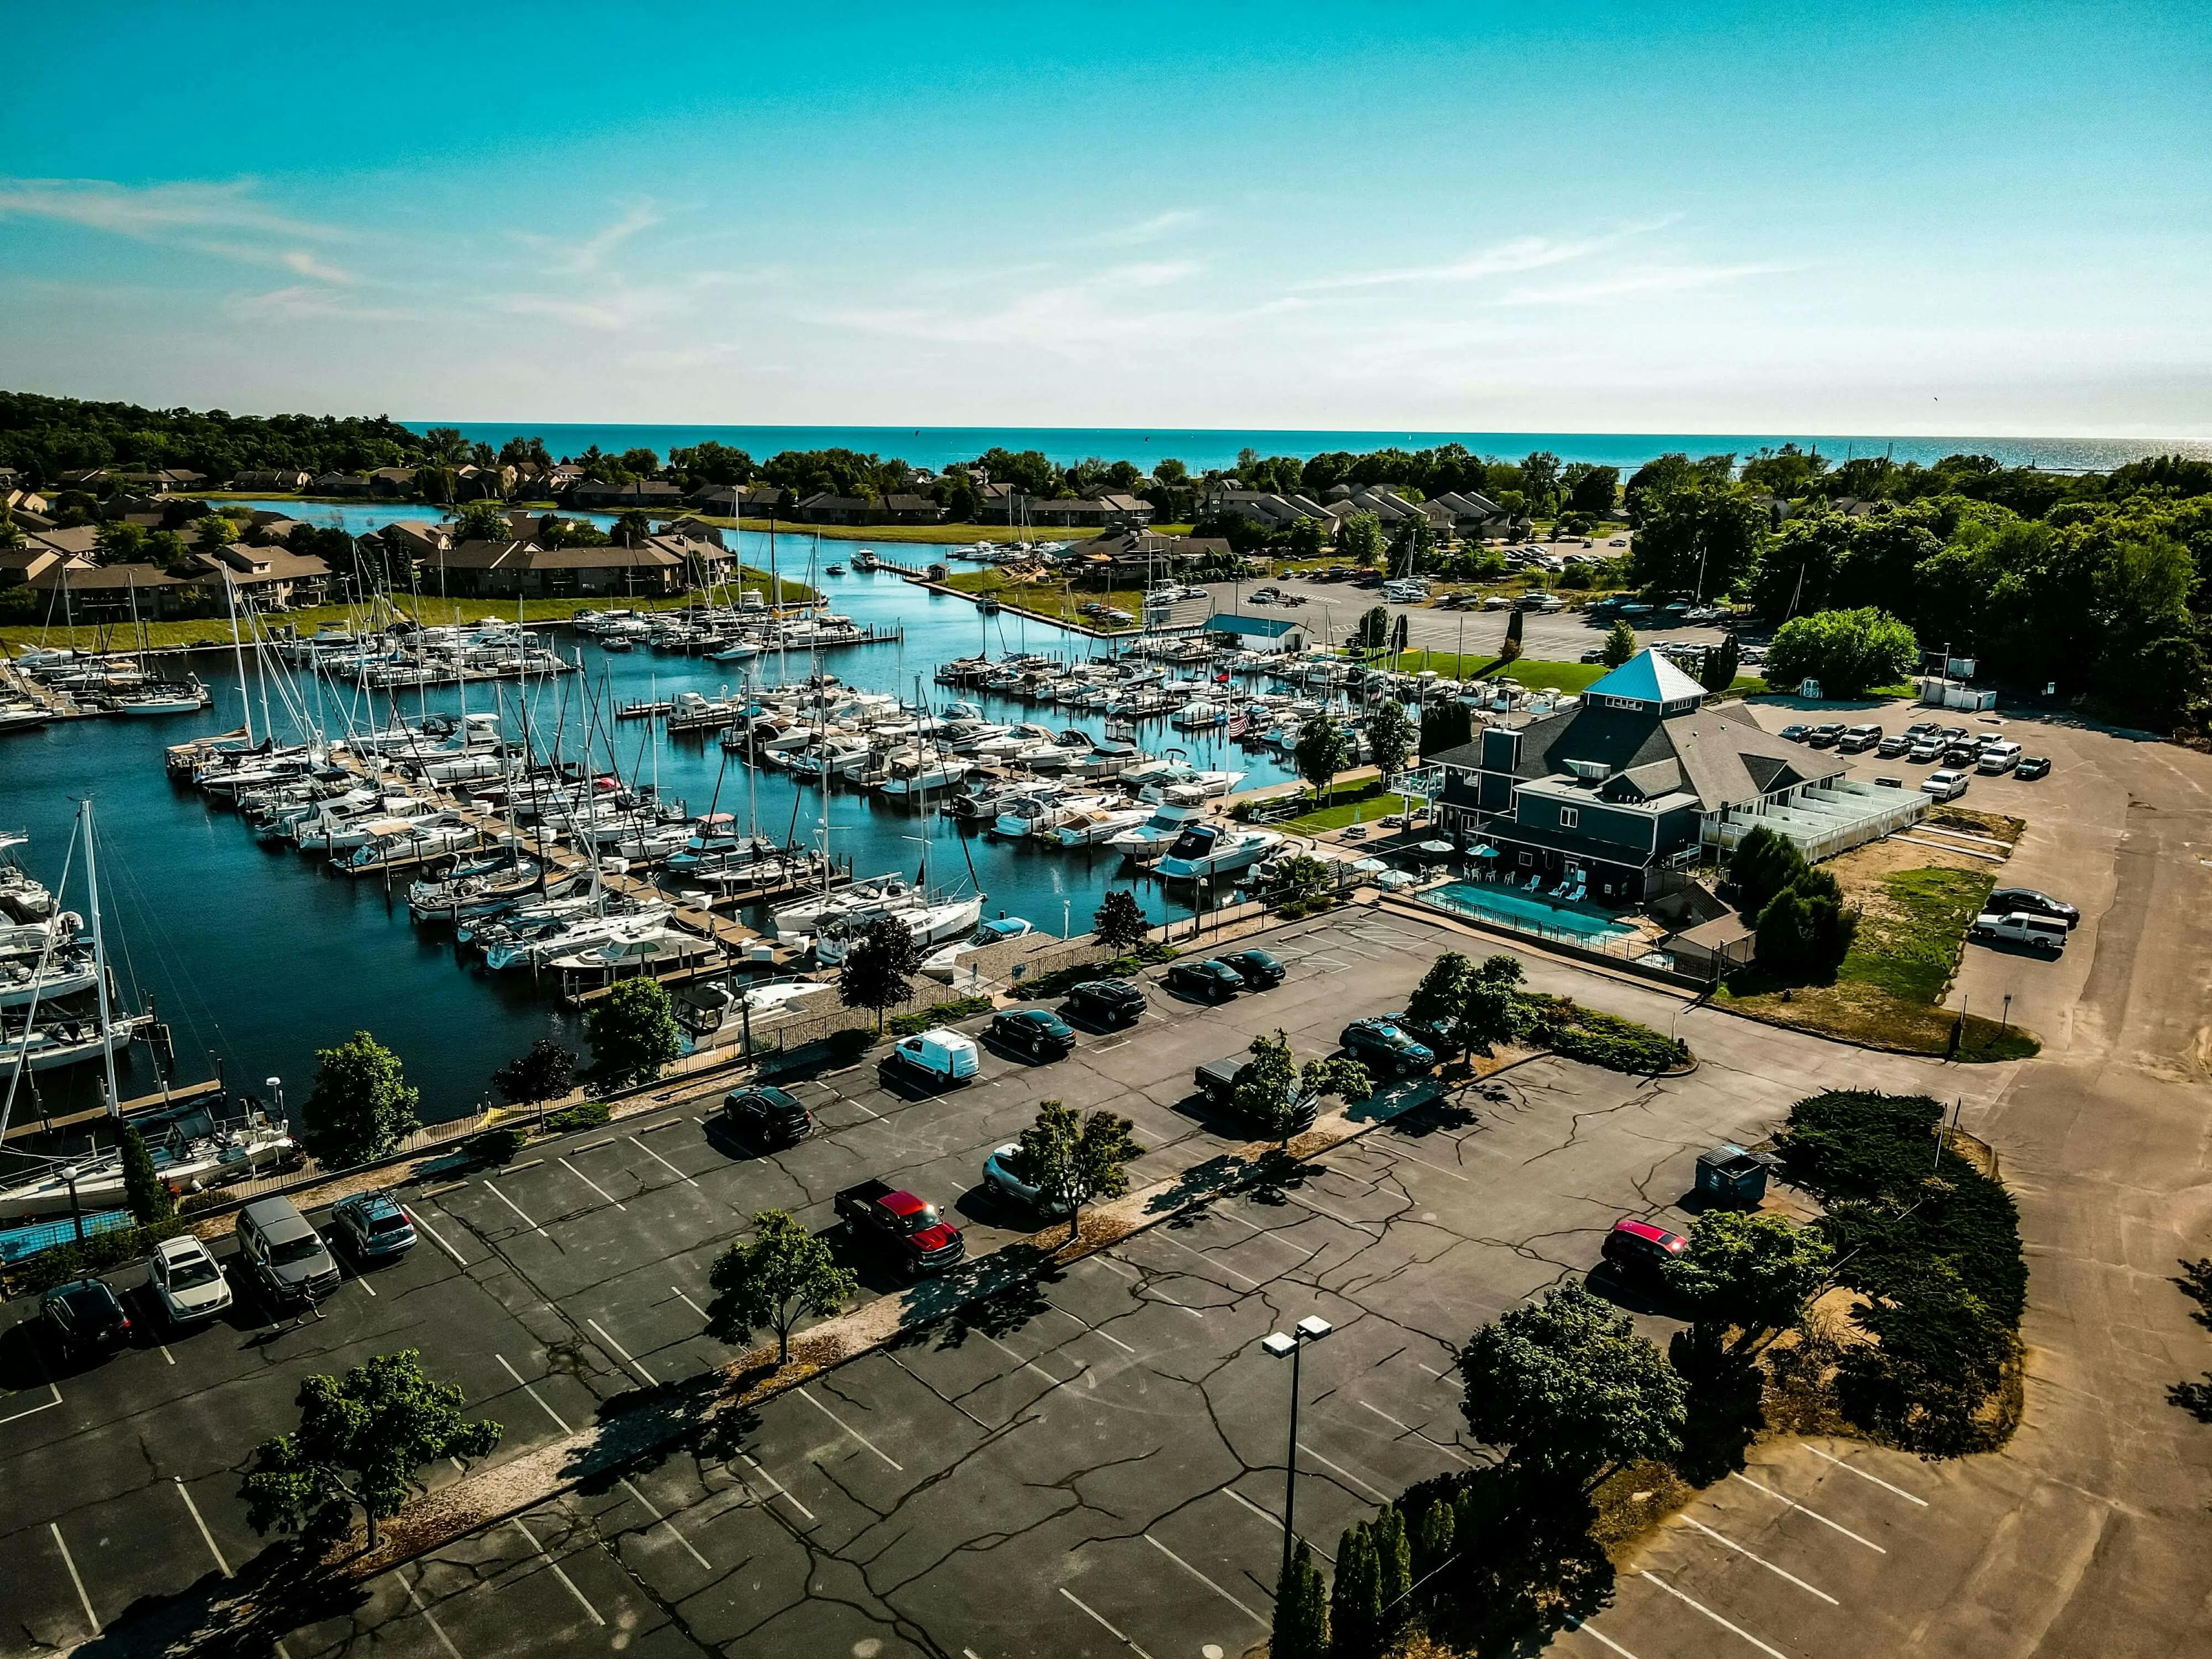 Aerial view of a marina with boats parked and a parking lot.